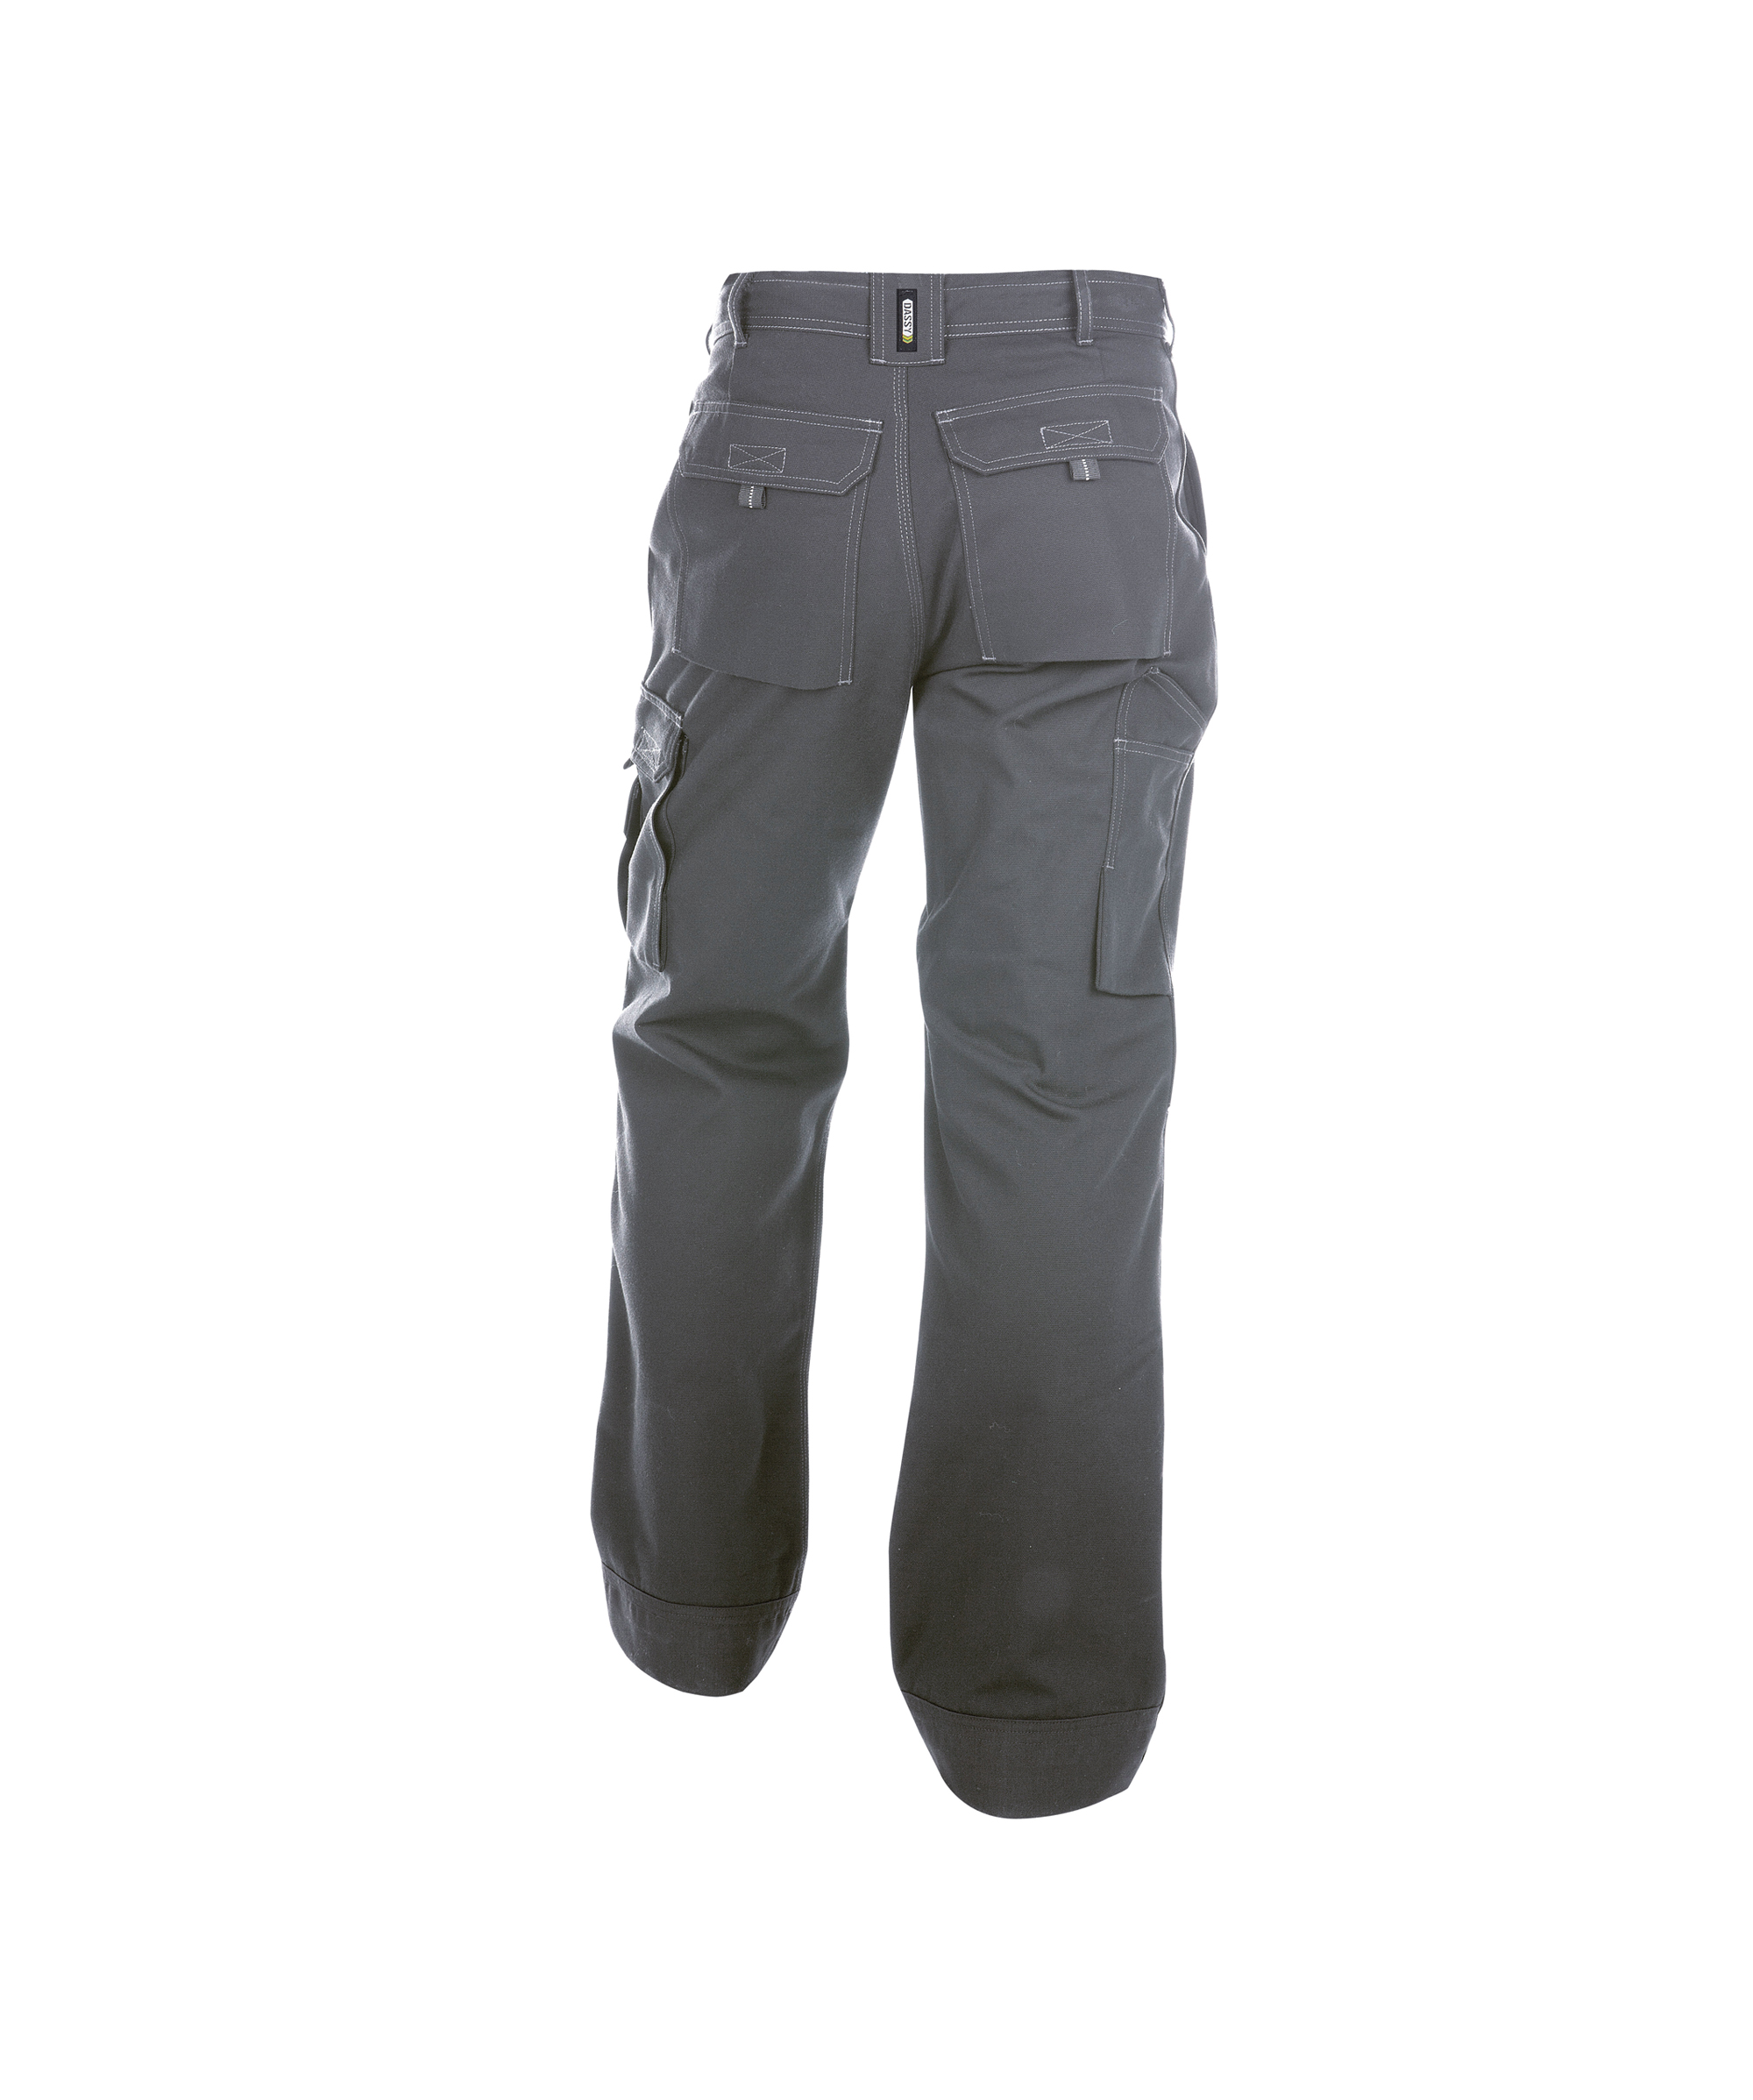 jackson_canvas-work-trousers-with-knee-pockets_cement-grey_back.jpg